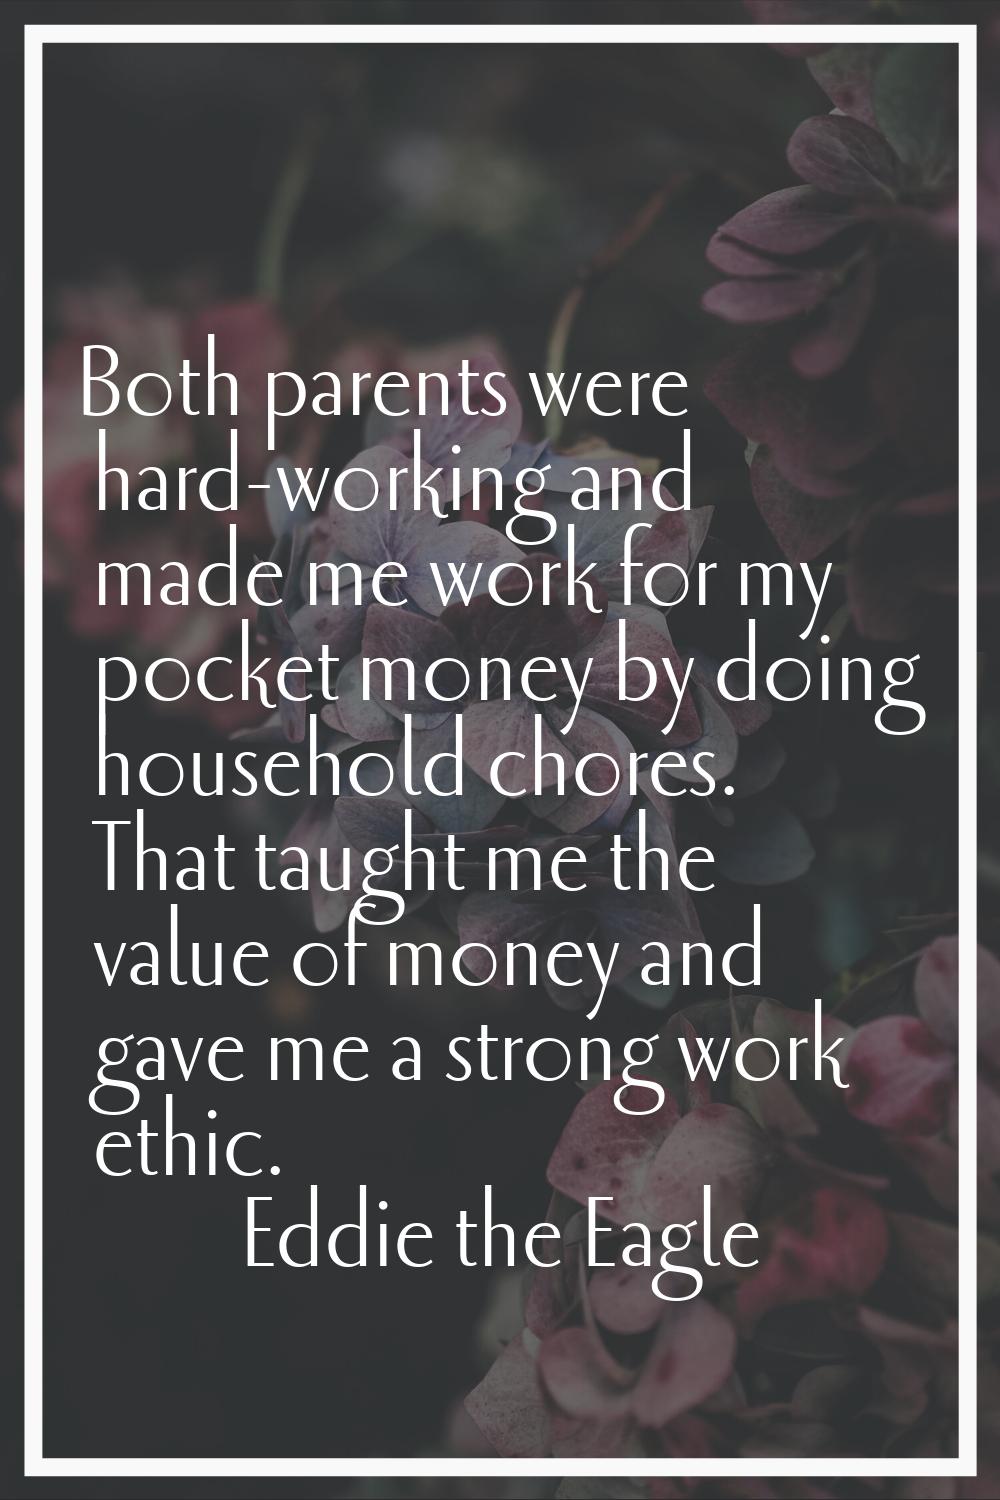 Both parents were hard-working and made me work for my pocket money by doing household chores. That